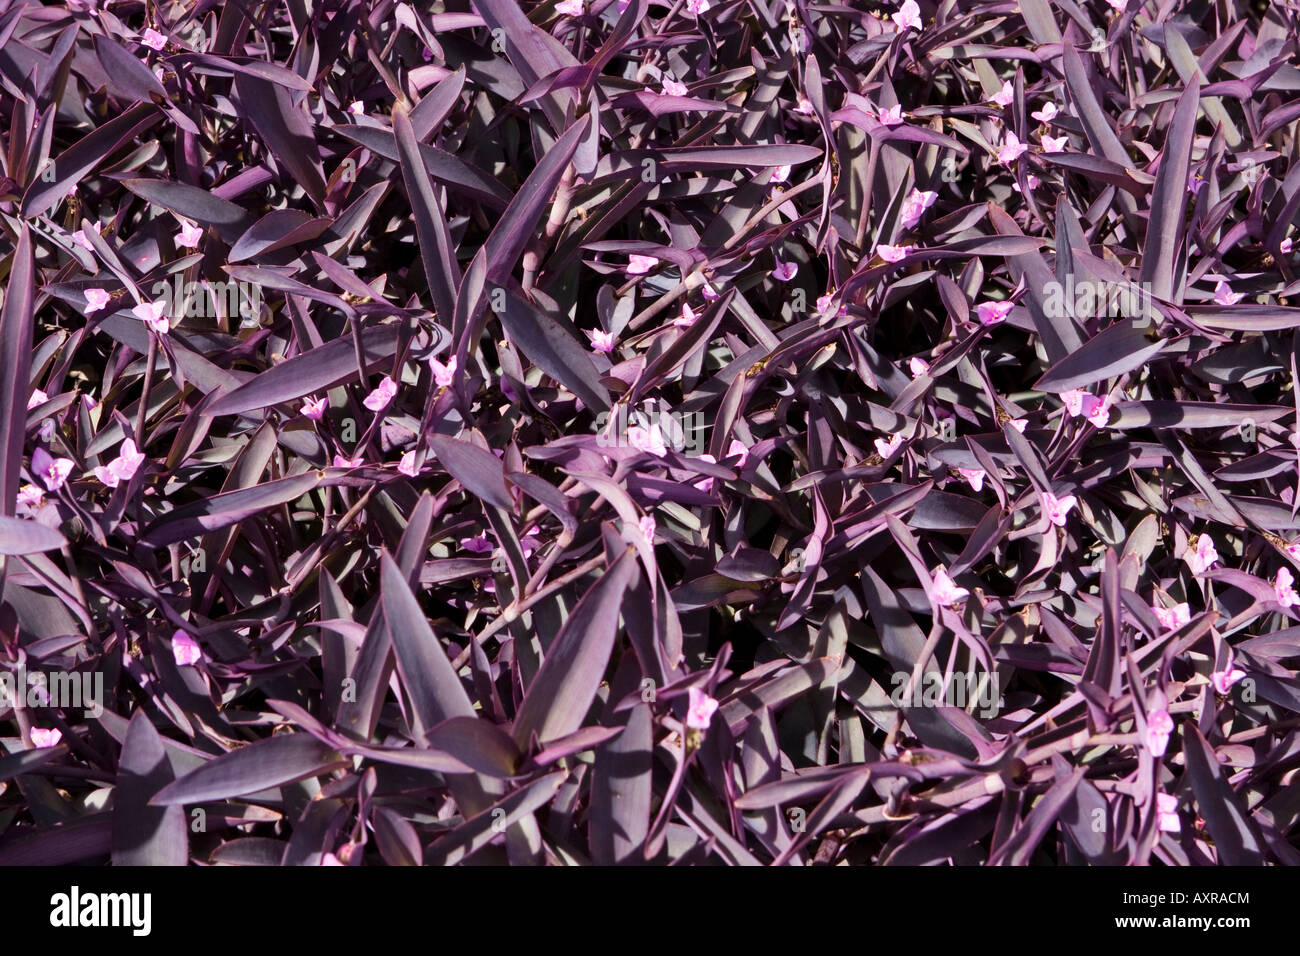 Massed 'Purple Hearts' in a flower bed Stock Photo